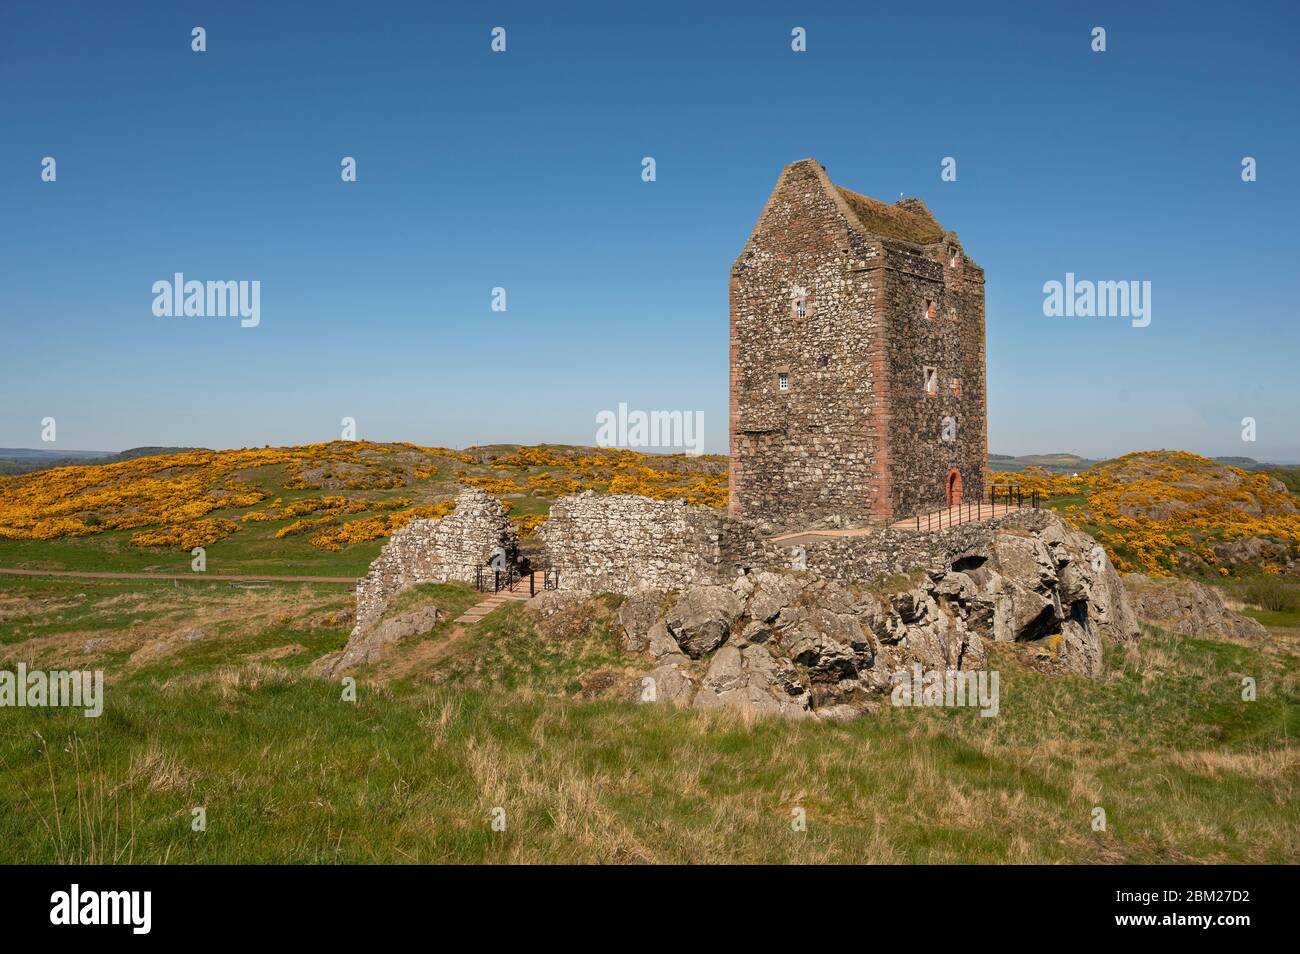 Smailholm Tower, Scottish Borders, Scotland, UK Scotland sunny weather View of Smailholm Tower, 65 ft towerhouse was built by a well-known Scottish Borders family in the first half of the 15th century. Pictured on a lovely spring day with blue skies and yellow gorse flowers in full bloom. Credit: phil wilkinson/Alamy Live News Stock Photo